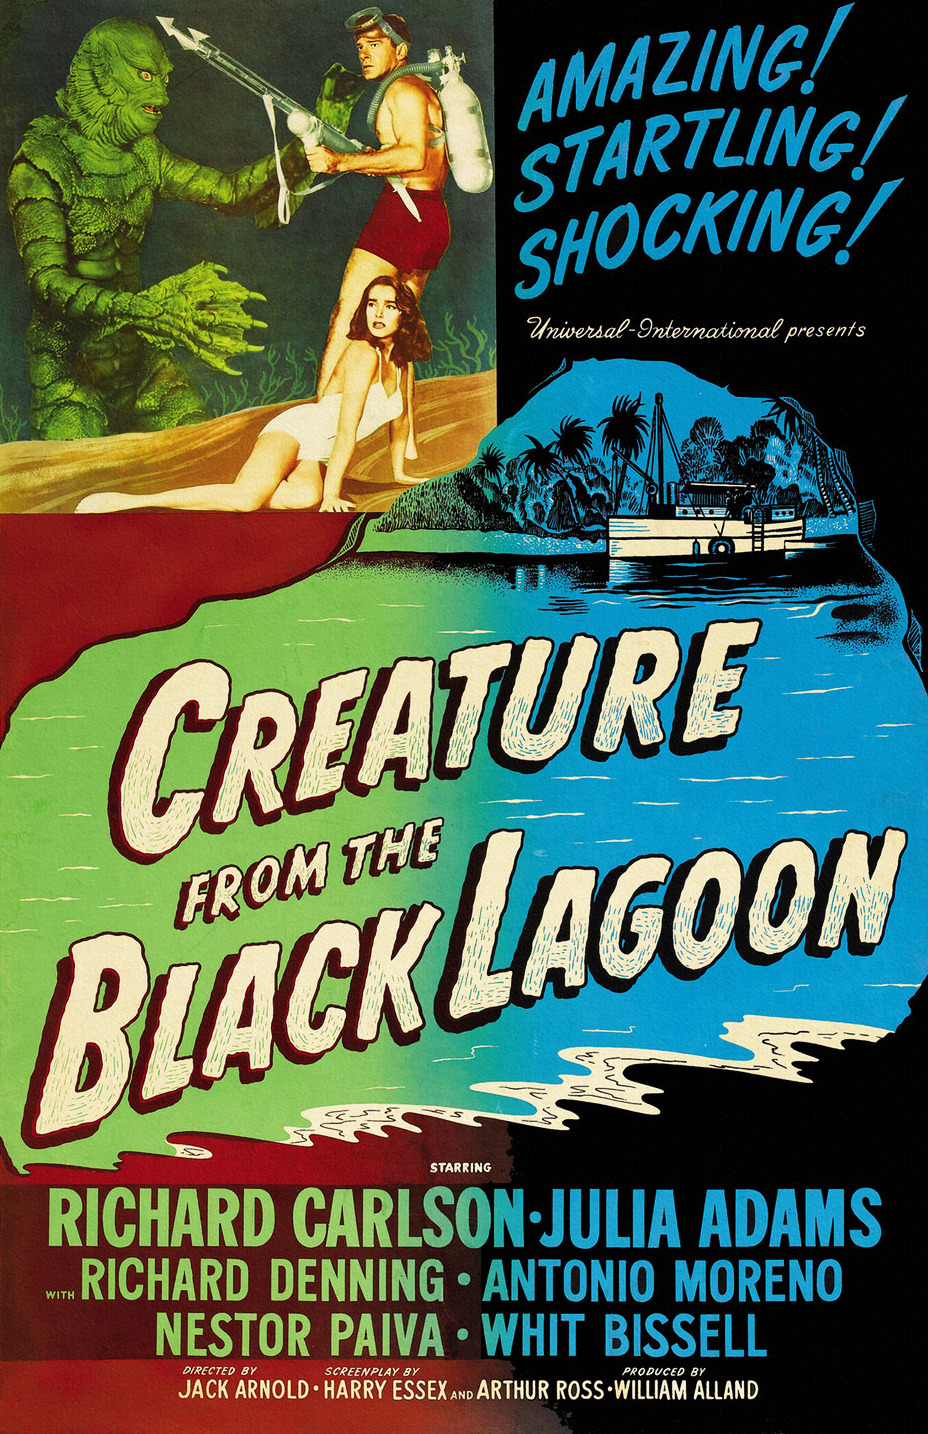 Creature from the black lagoon figure